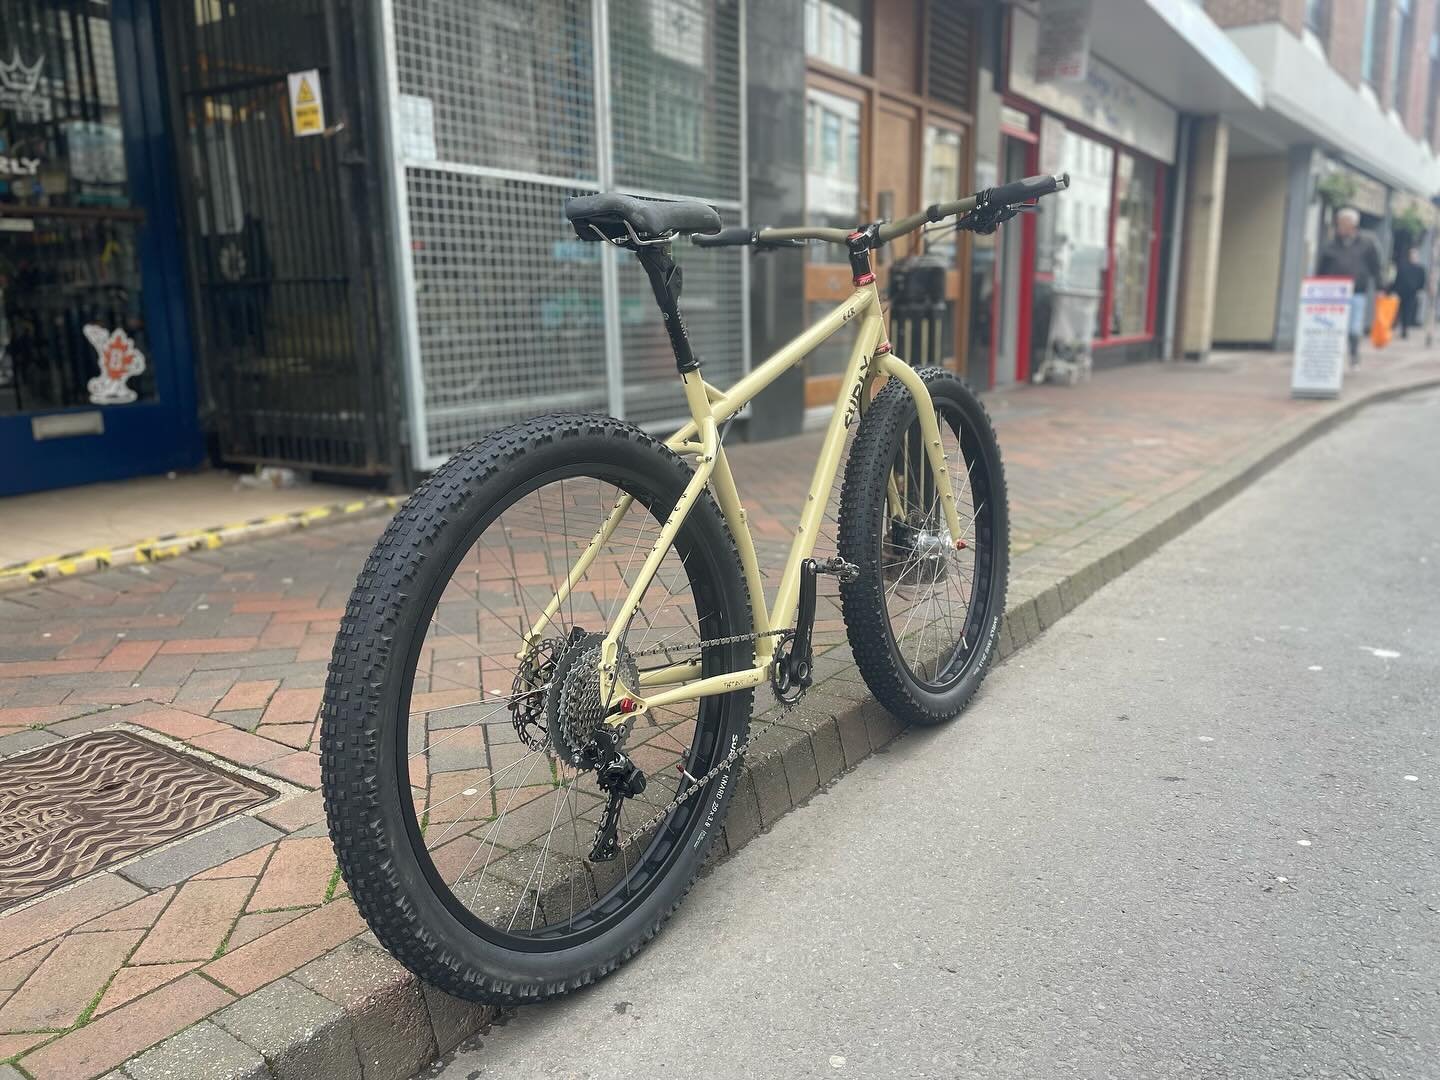 Stuart&rsquo;s @surlybikes ECR in for a strip down. Some choice bits on this one, @chriskingbuzz hubs and headset, @redshiftsports seatpost, @renthal_cycling fatbars, @bikethomson stem and the rest all @shimanomtb XT. Rides like a dream! A real go-an